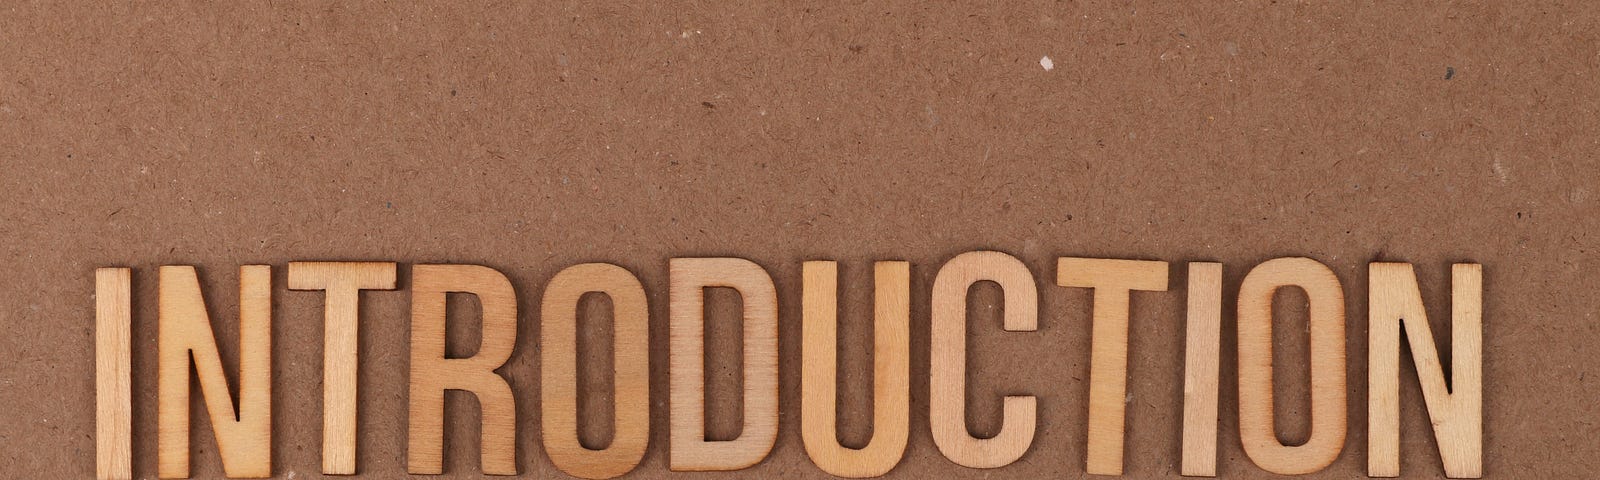 The word “introduction” spelled out against a brown background